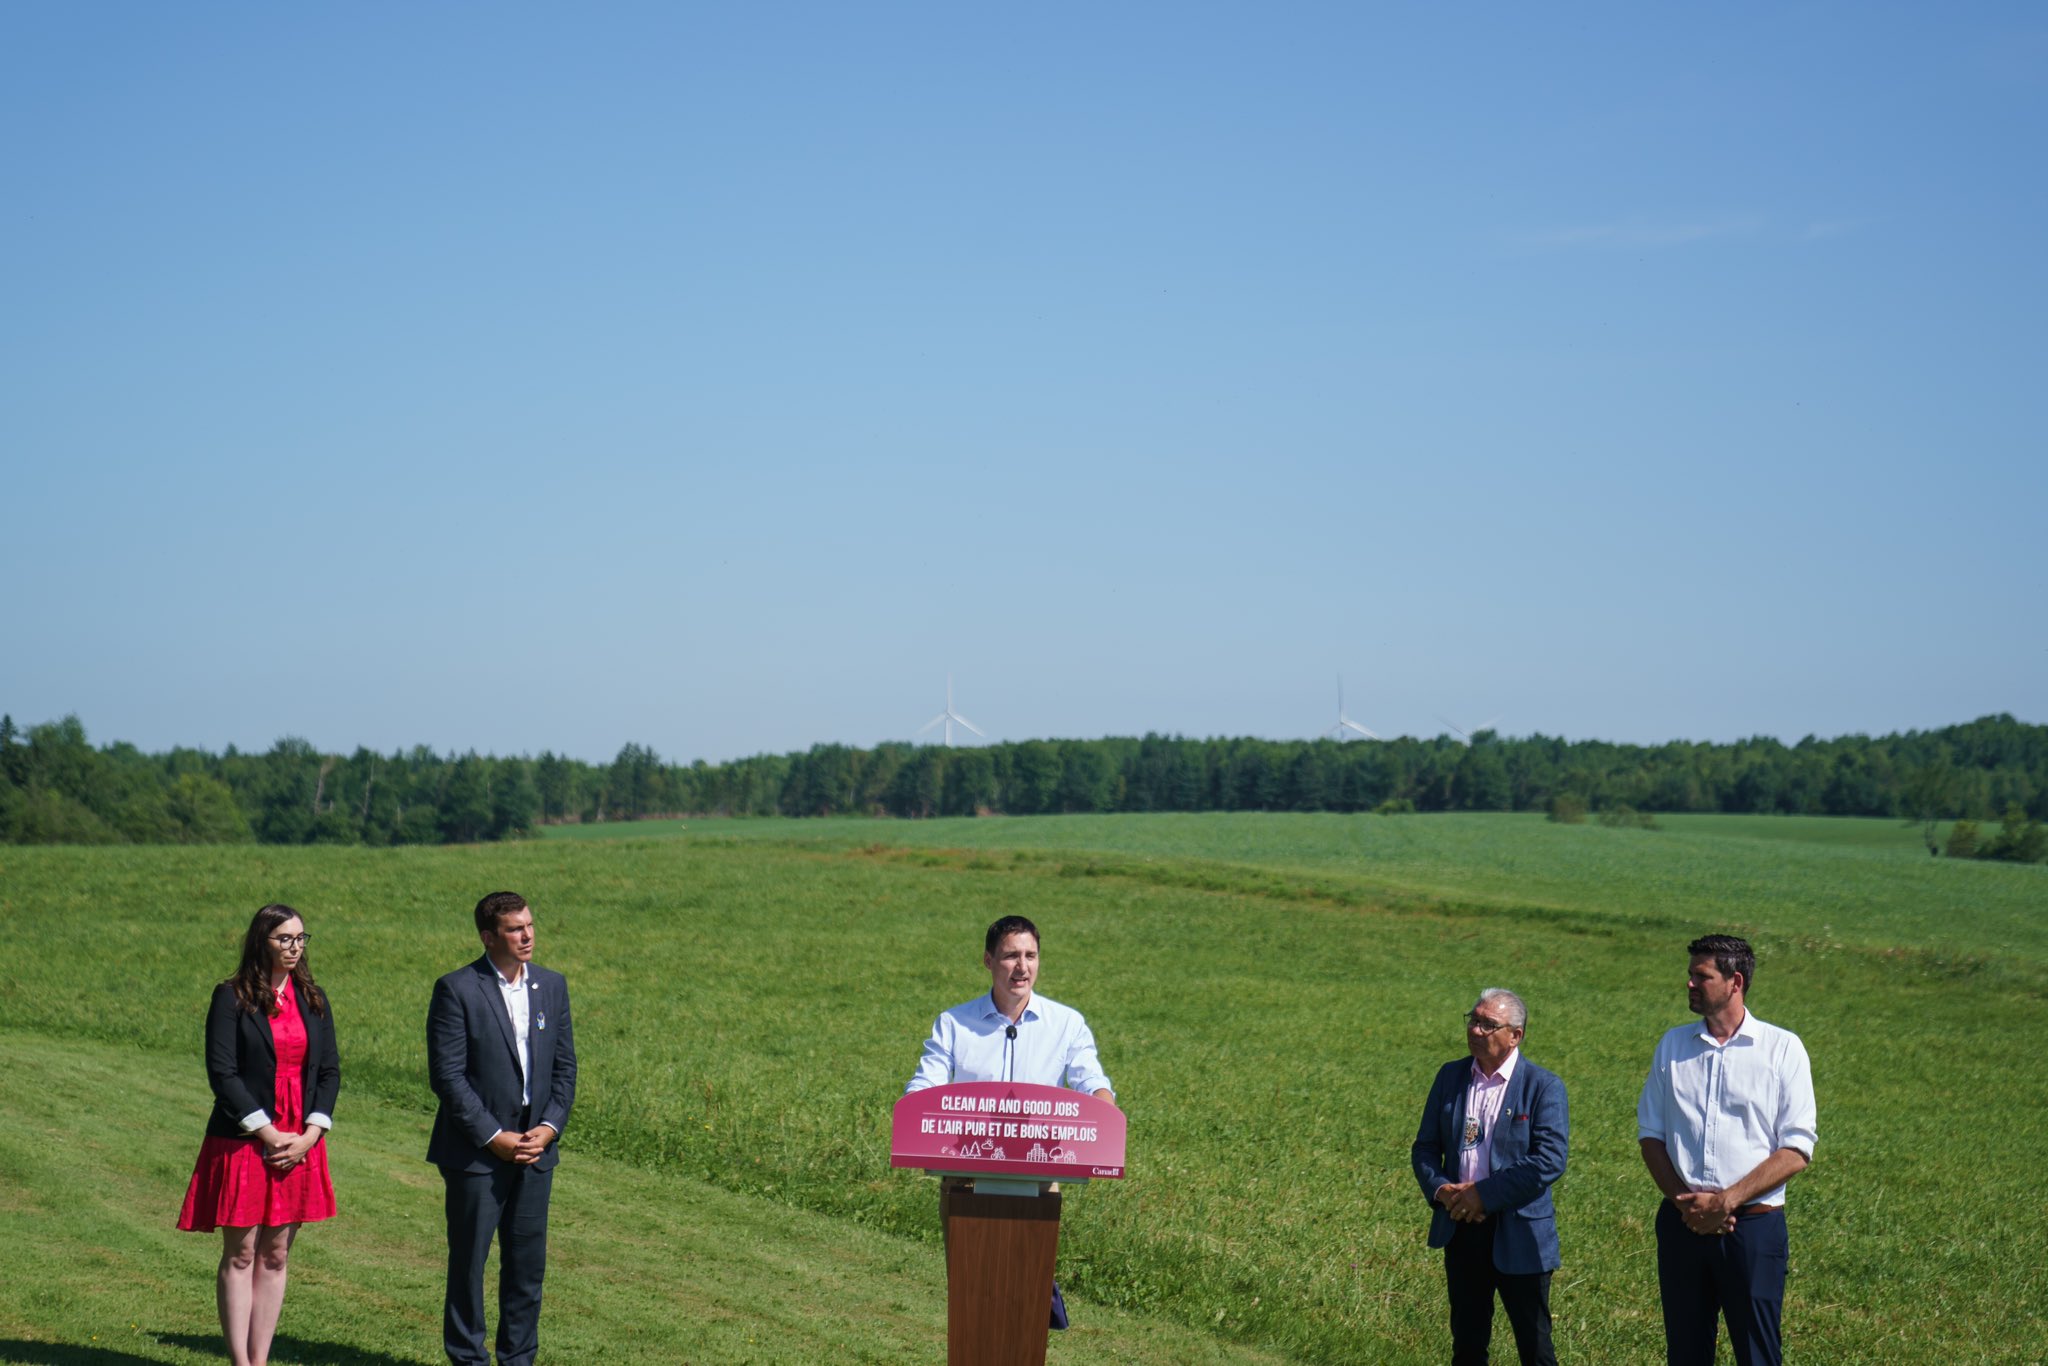 Prime Minister Justin Trudeau is standing at a podium outdoors. Chief Sydney Peters, Member of Parliament Kody Blois, Minister Sean Fraser, and SWEB Development Manager Sarah Rosenblat are standing behind him.